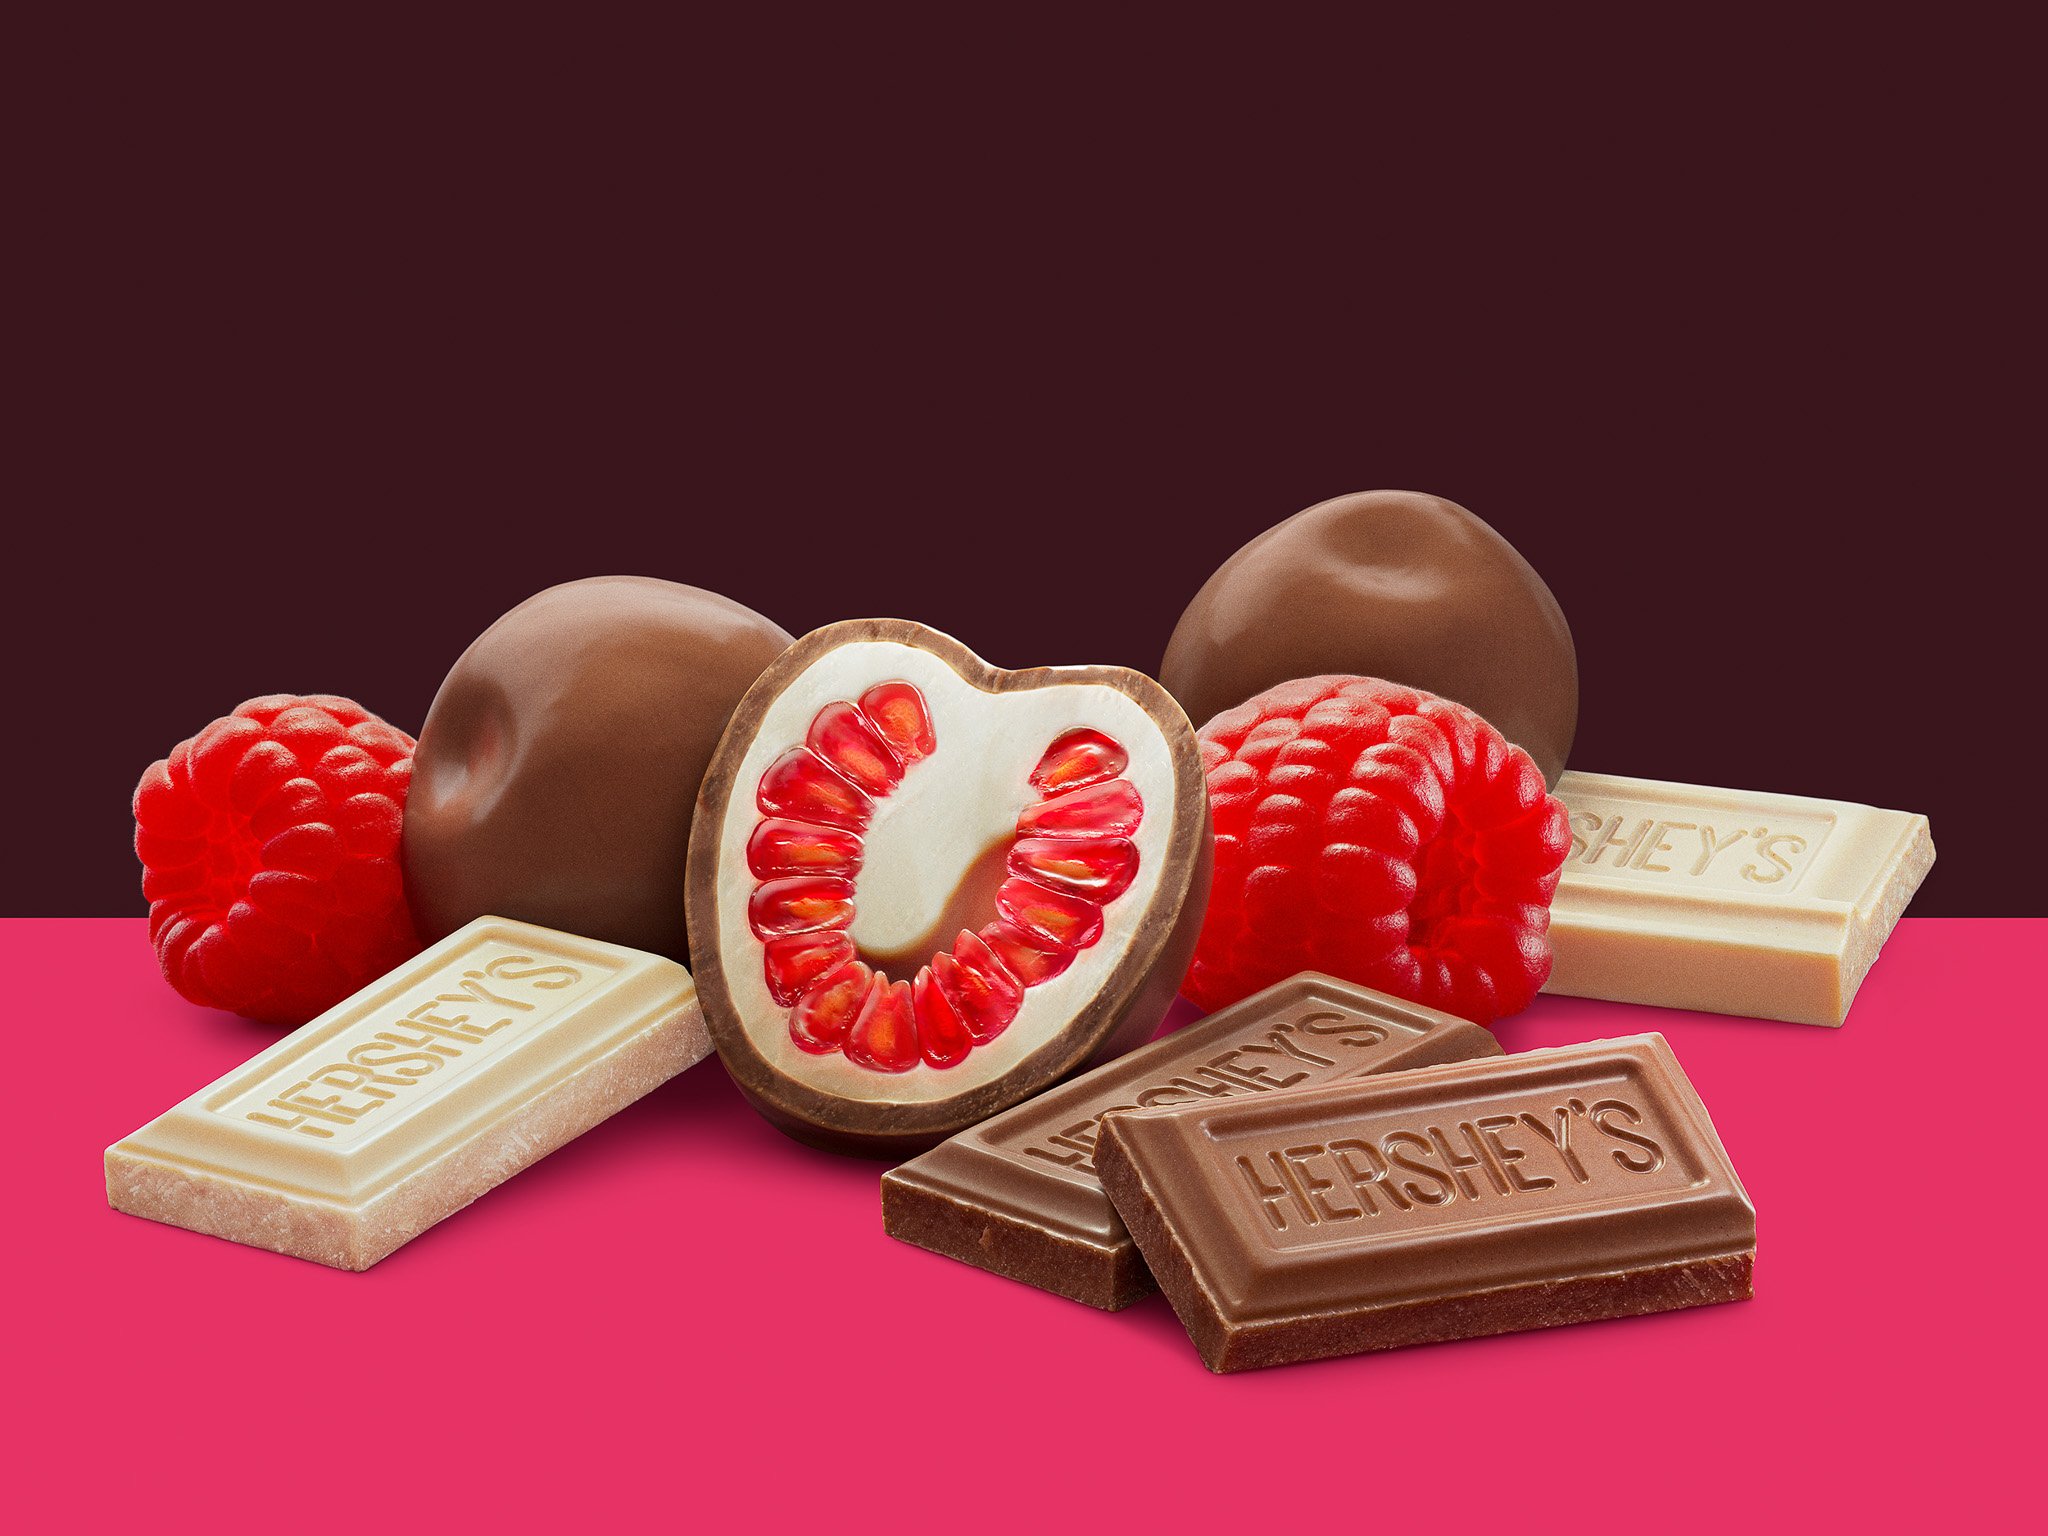 electric art cgi creates cover art for new hershey's chocolate product